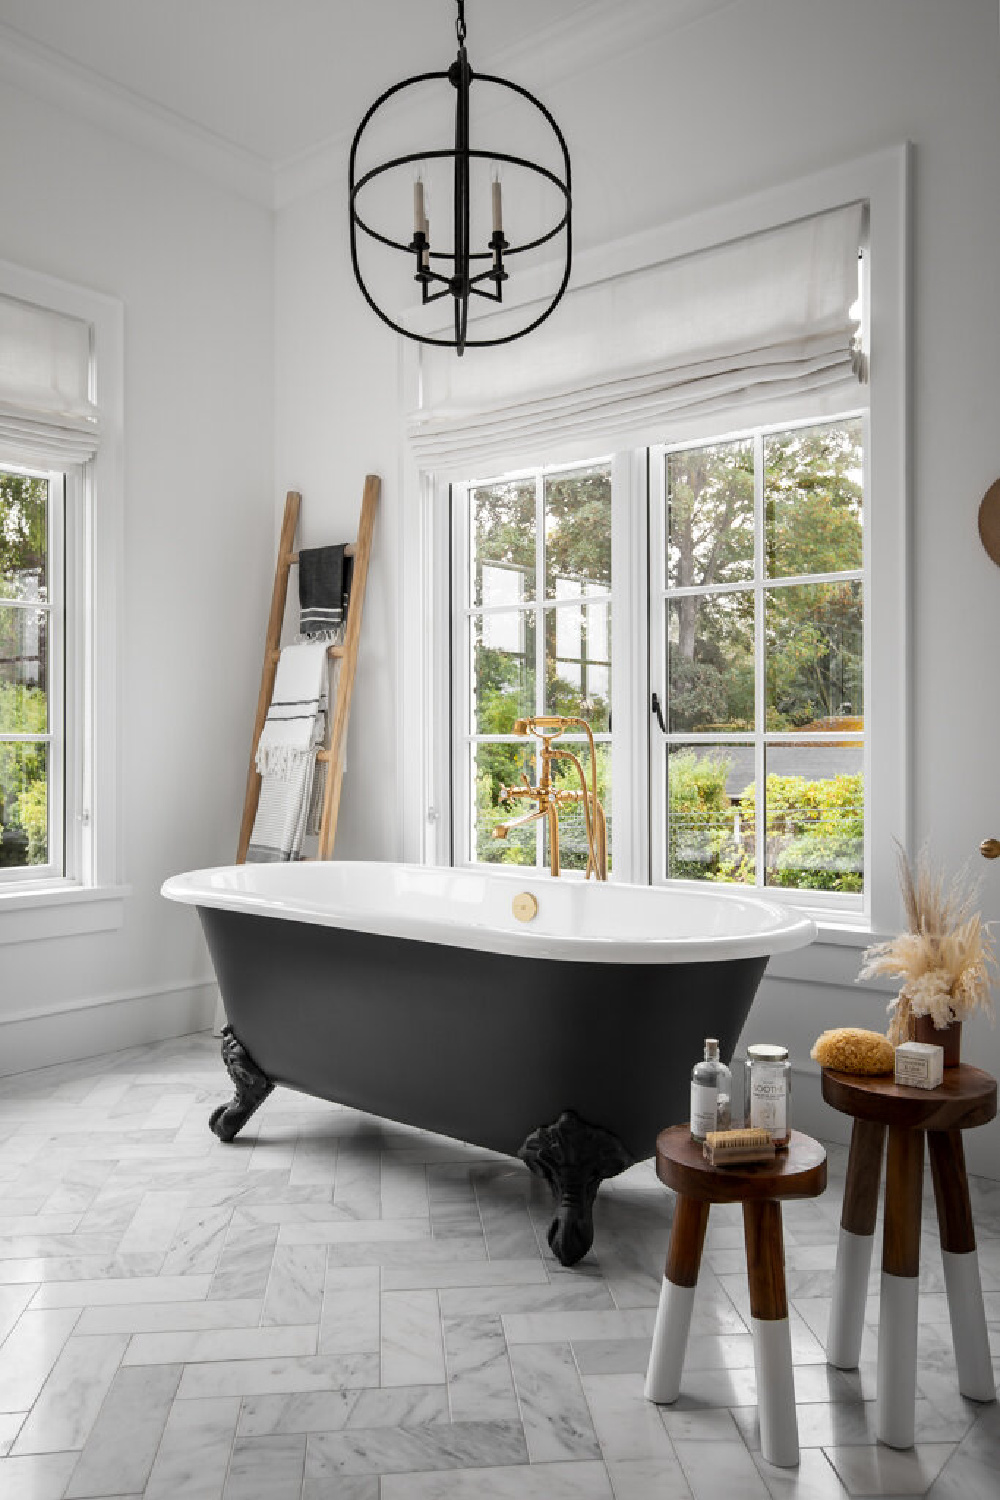 Clawfoot tub in beautiful French country home with interior design by Jenny Martin Design. #frenchcountrybathroom #interiordesign